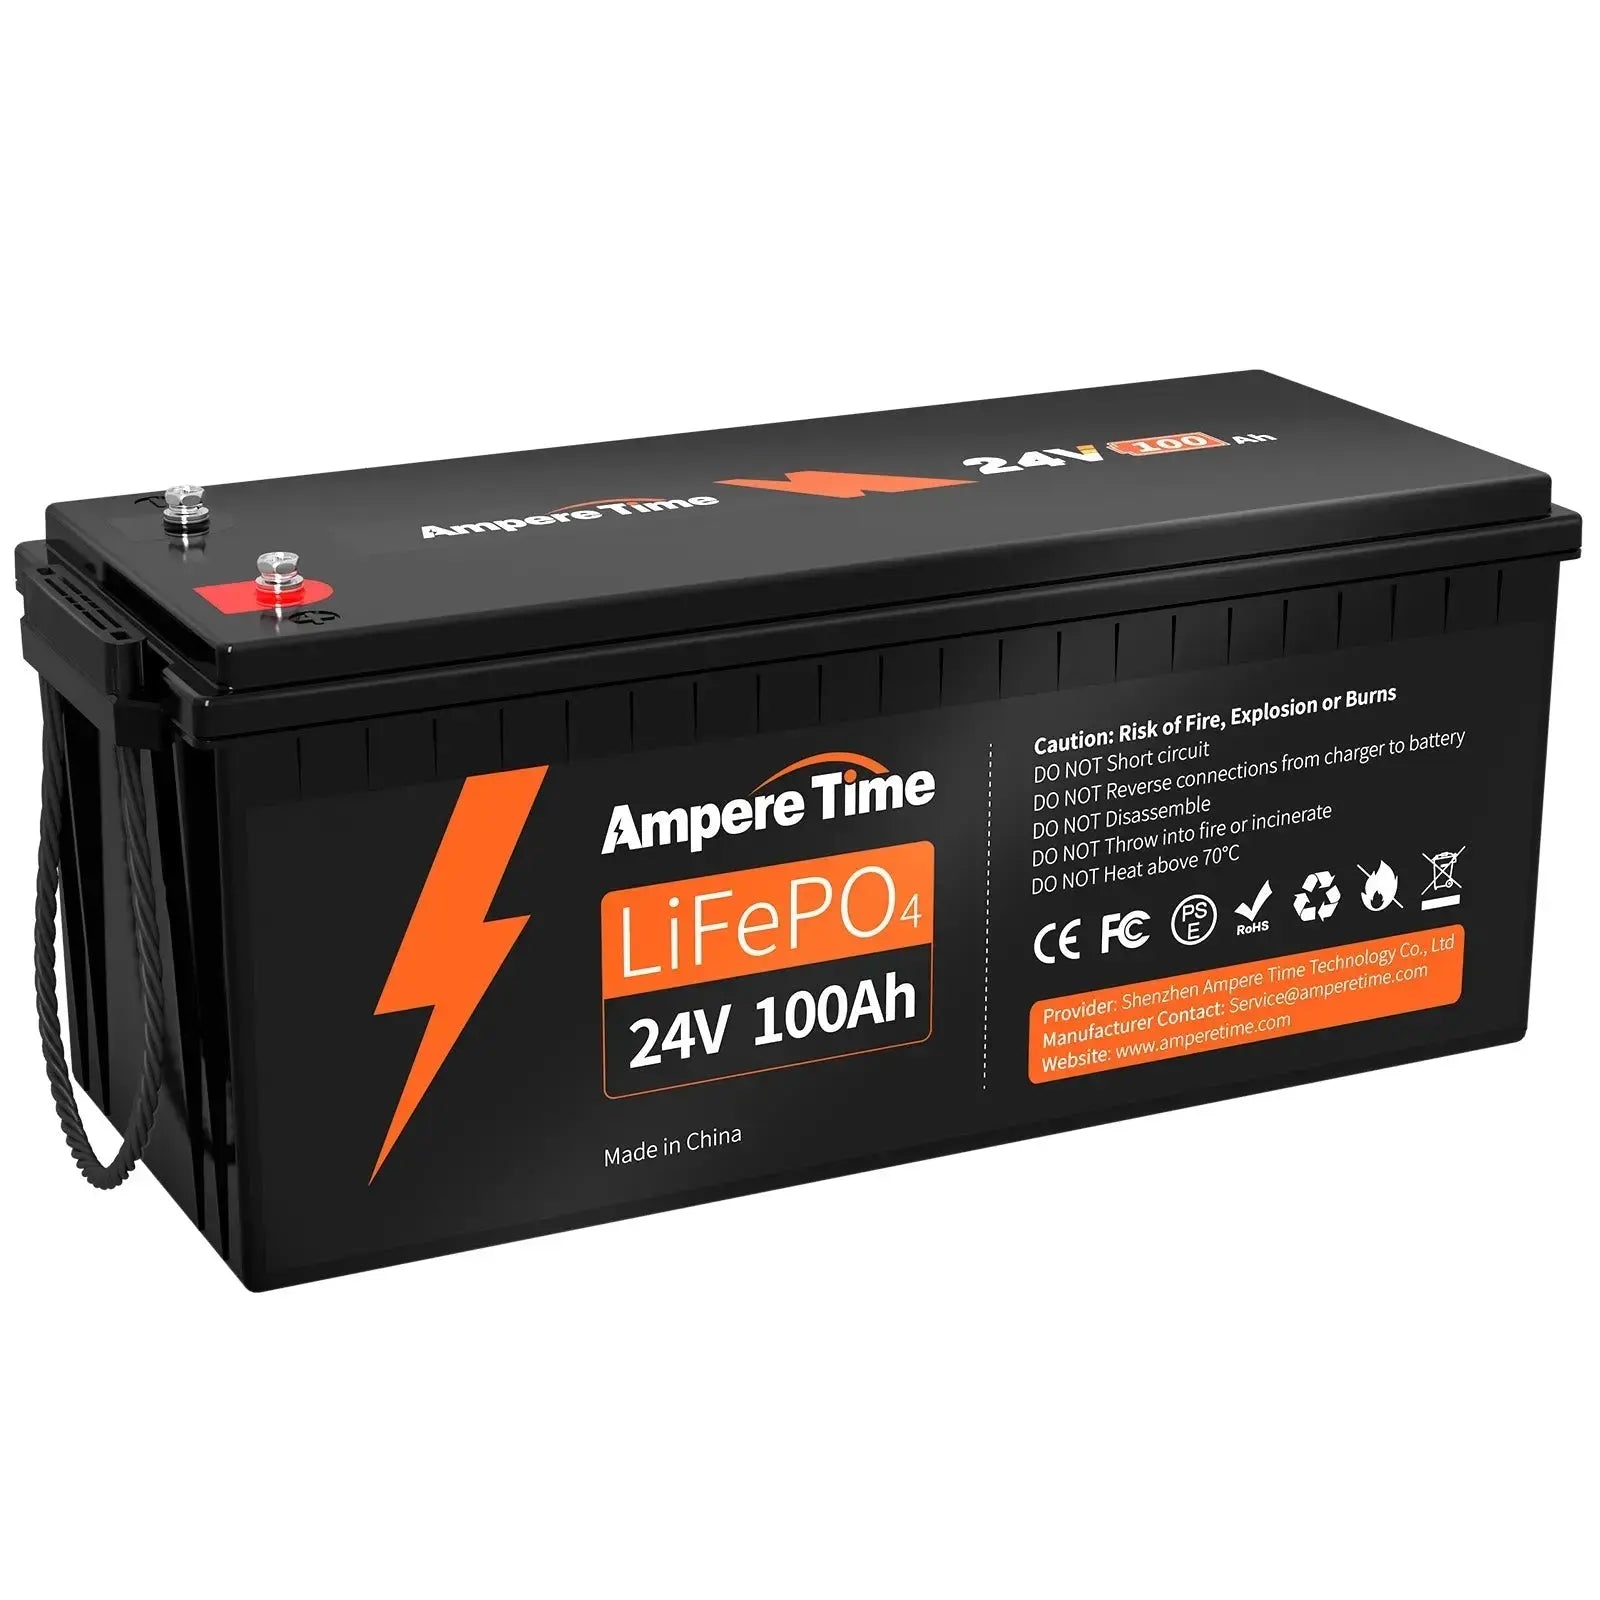 24V 100Ah LiFePO4 Deep Cycle Rechargeable Battery, 2500-7000 Life Cycles &  10-Year lifetime, Built-in BMS